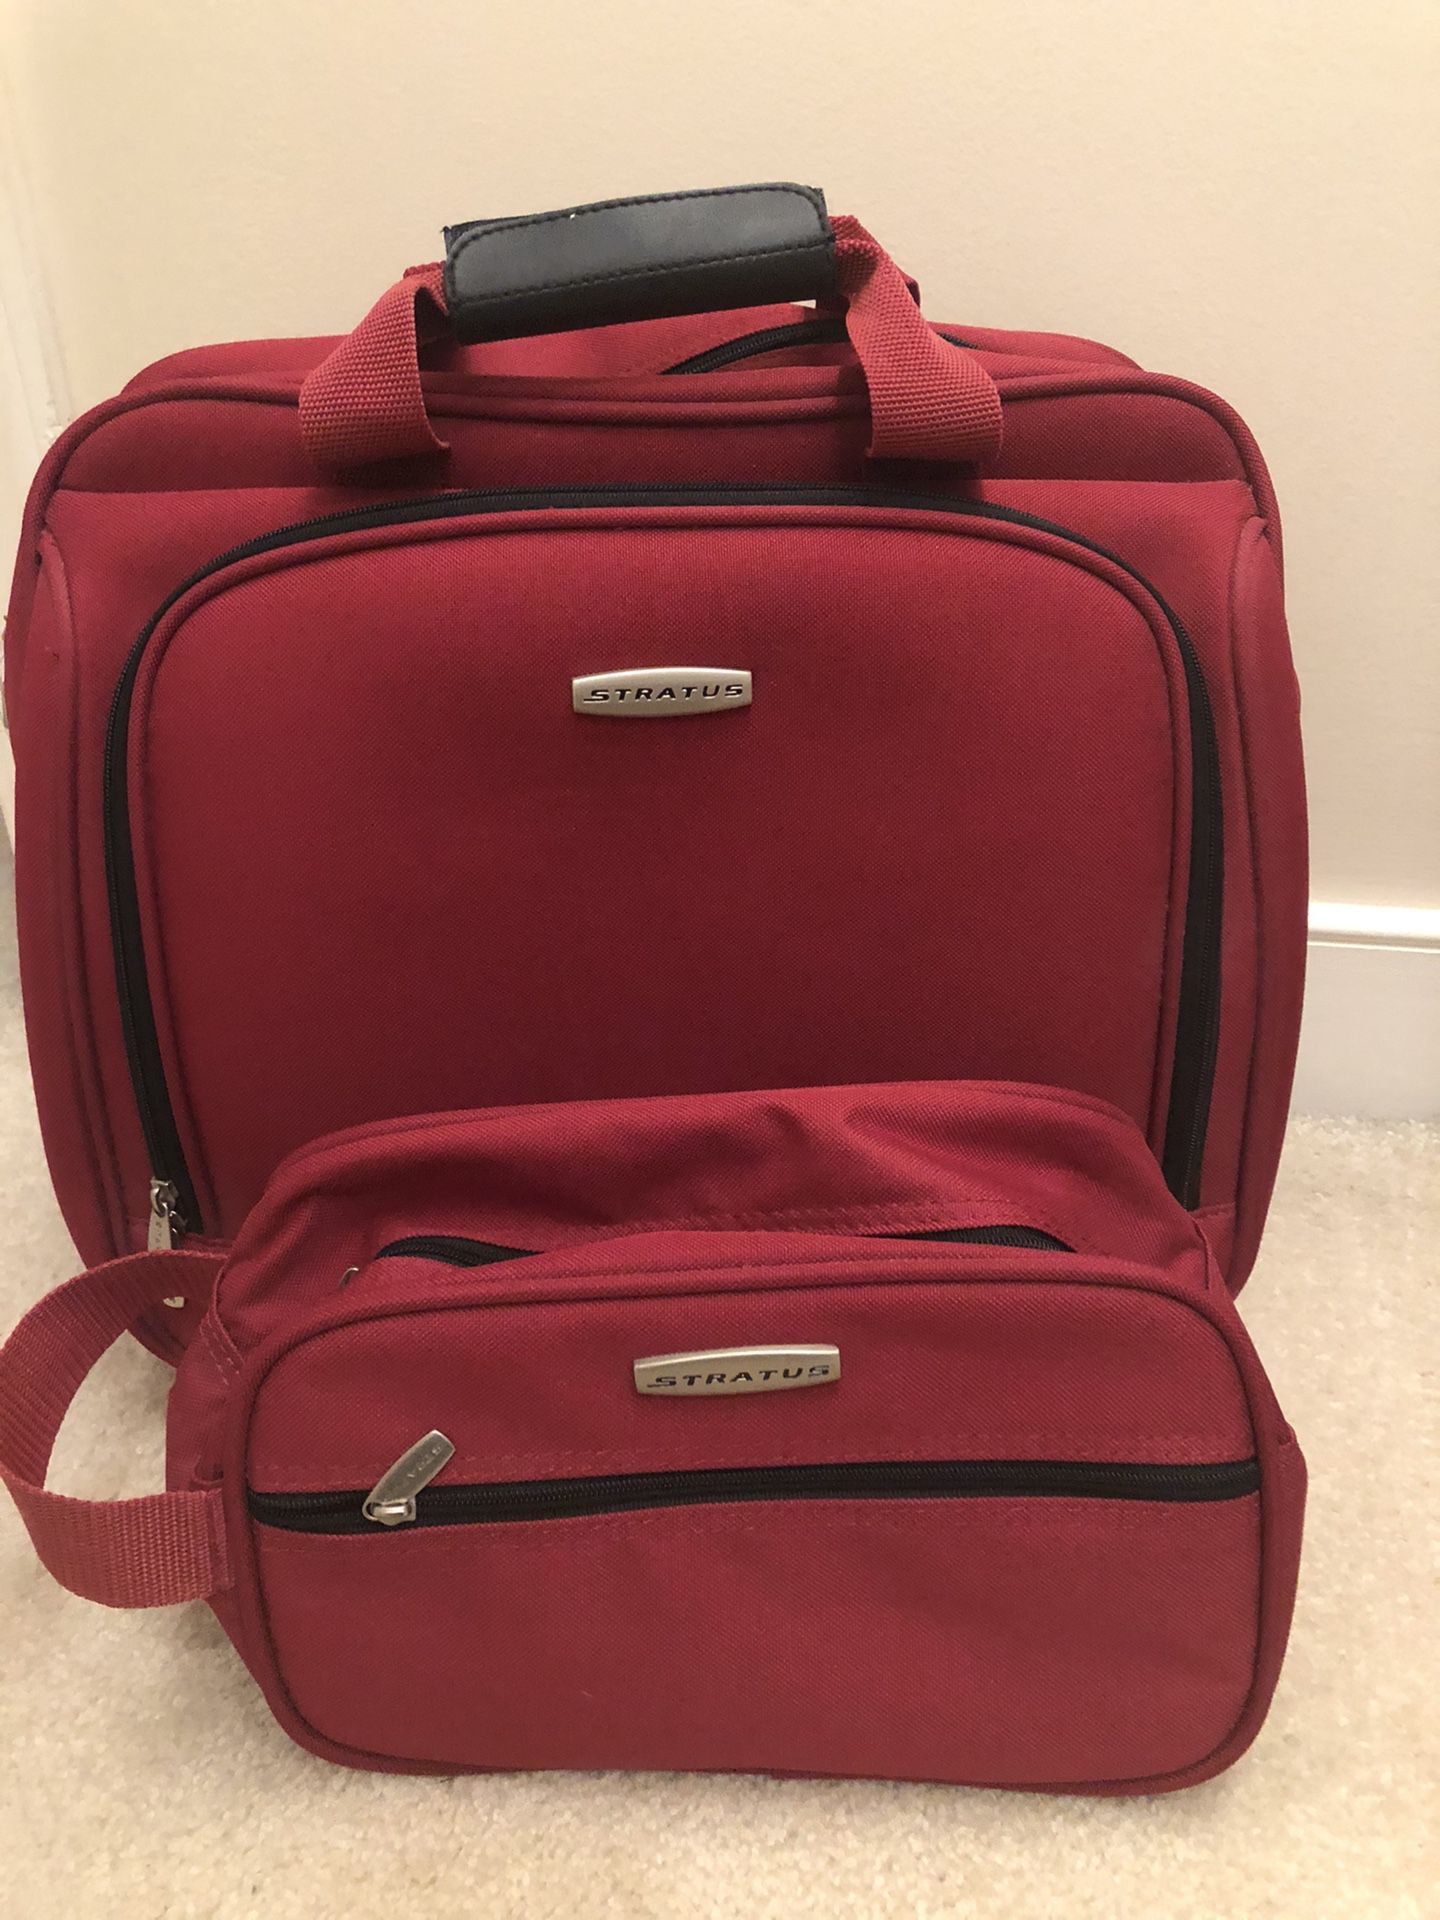 Red Stratus Rolling duffle and toiletry bag